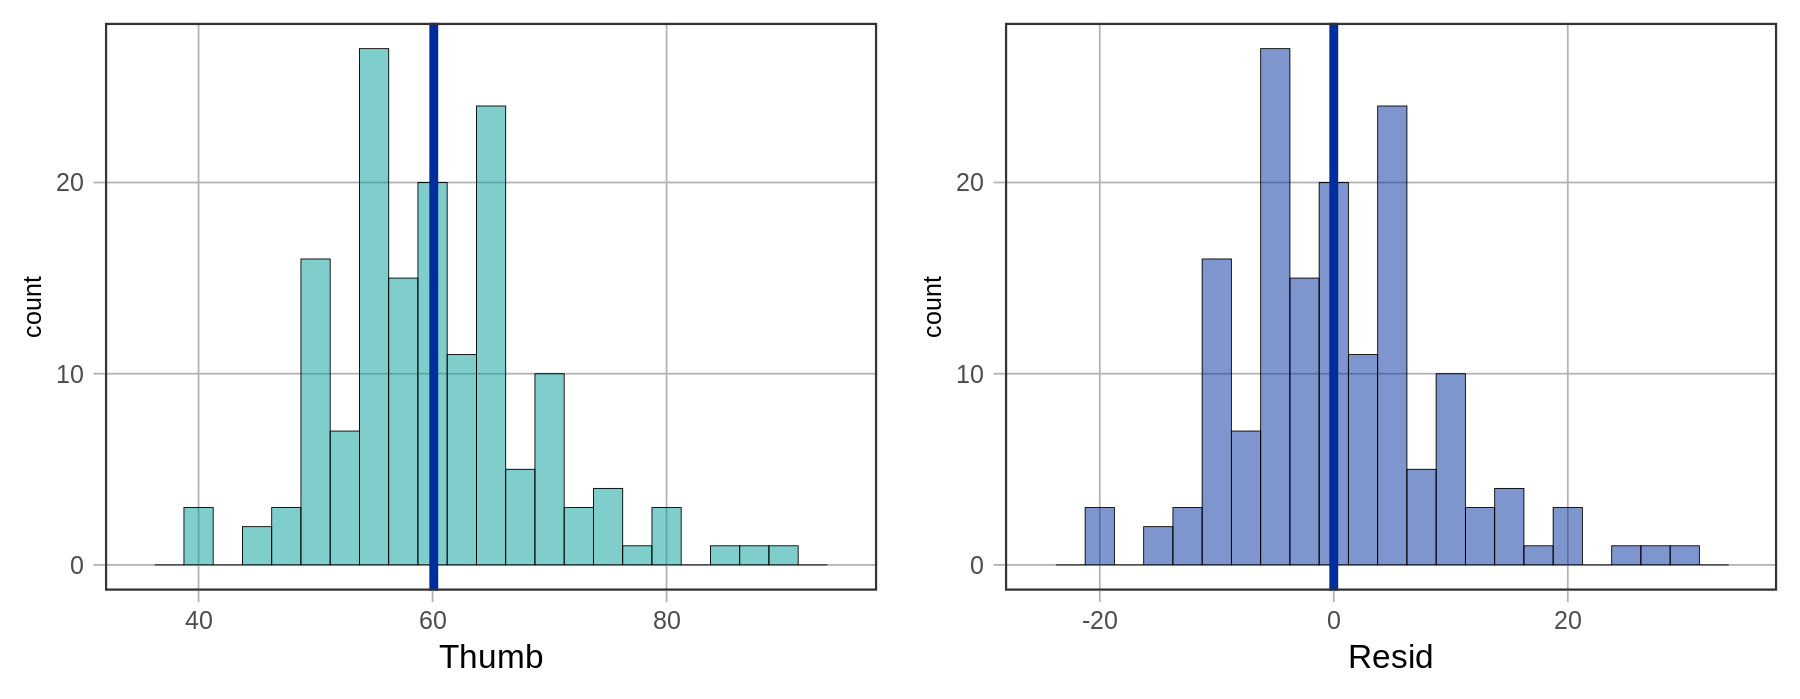 A histogram of the distribution of Thumb in Fingers with the mean on the left. A histogram of the distribution of Resid in Fingers on the right.